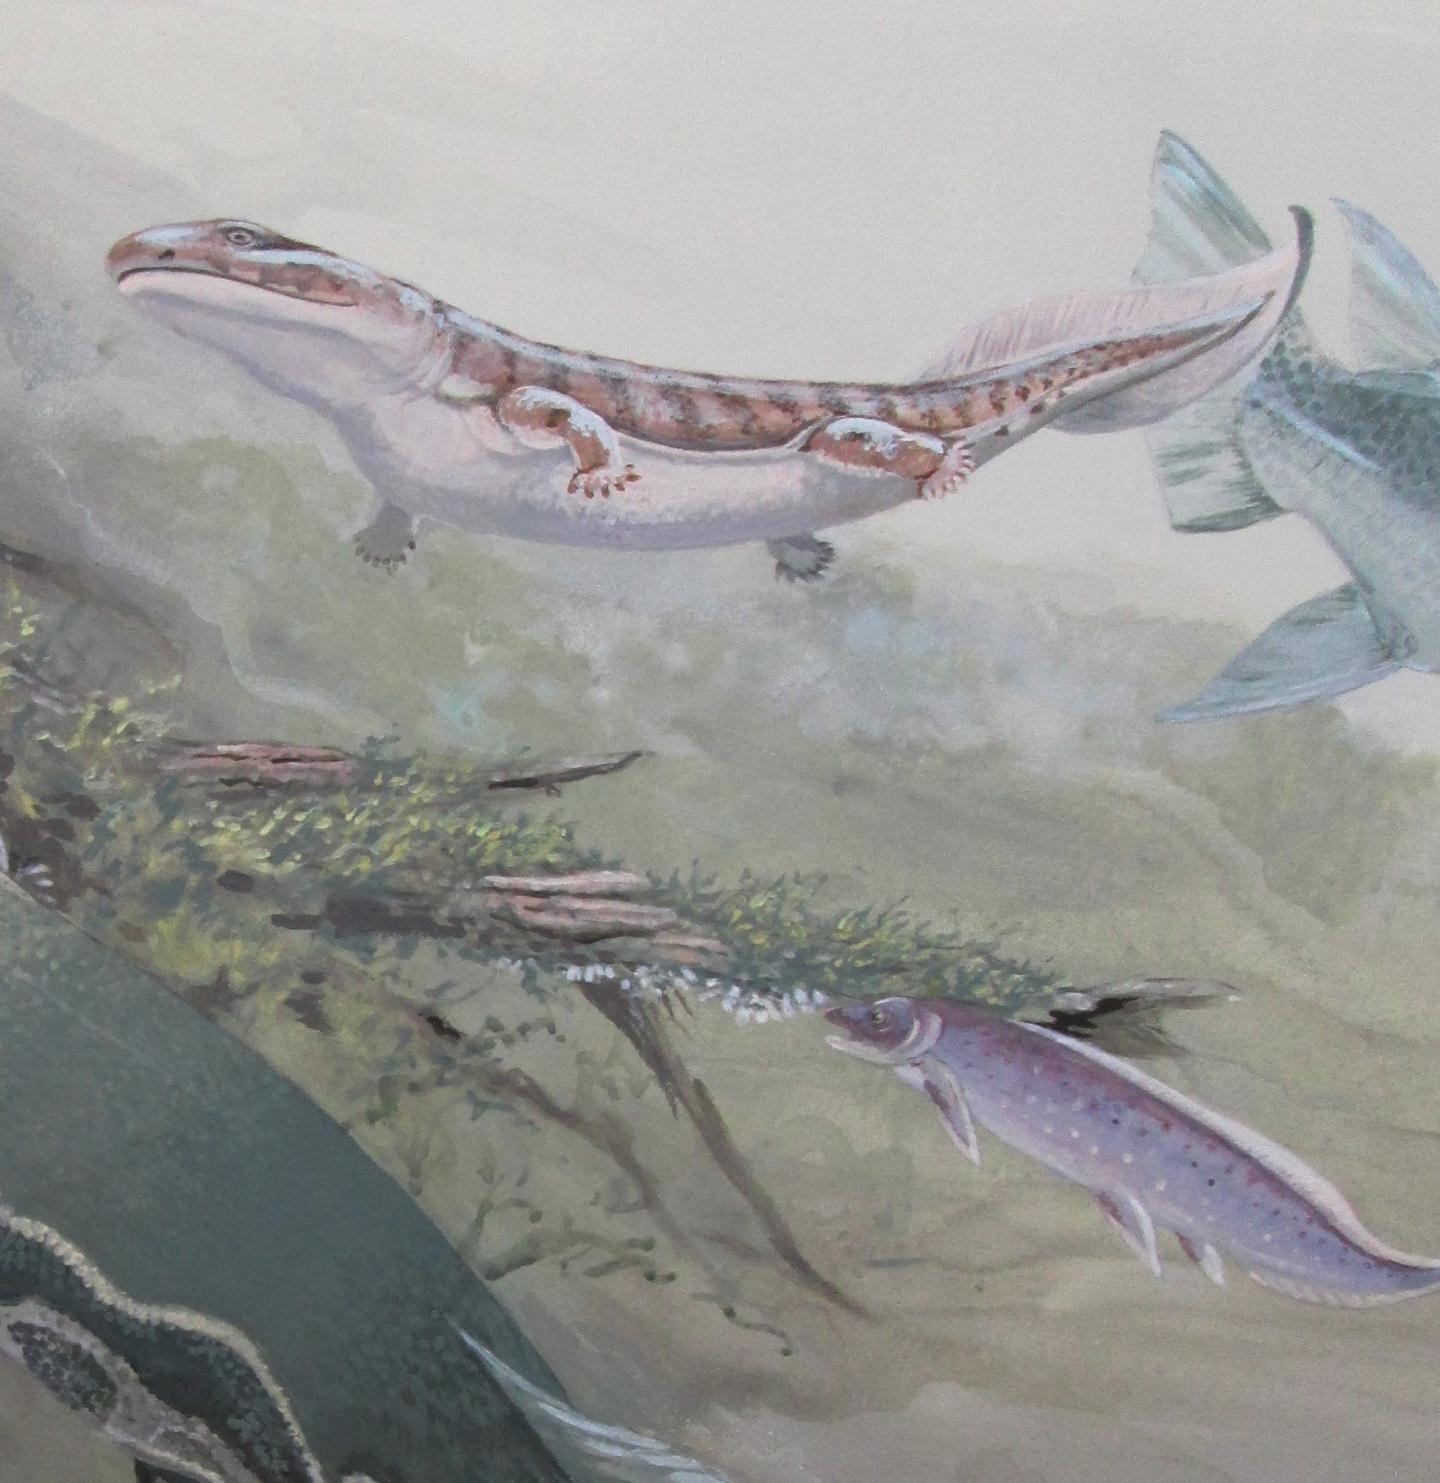 Fossil expands ancient fish family tree